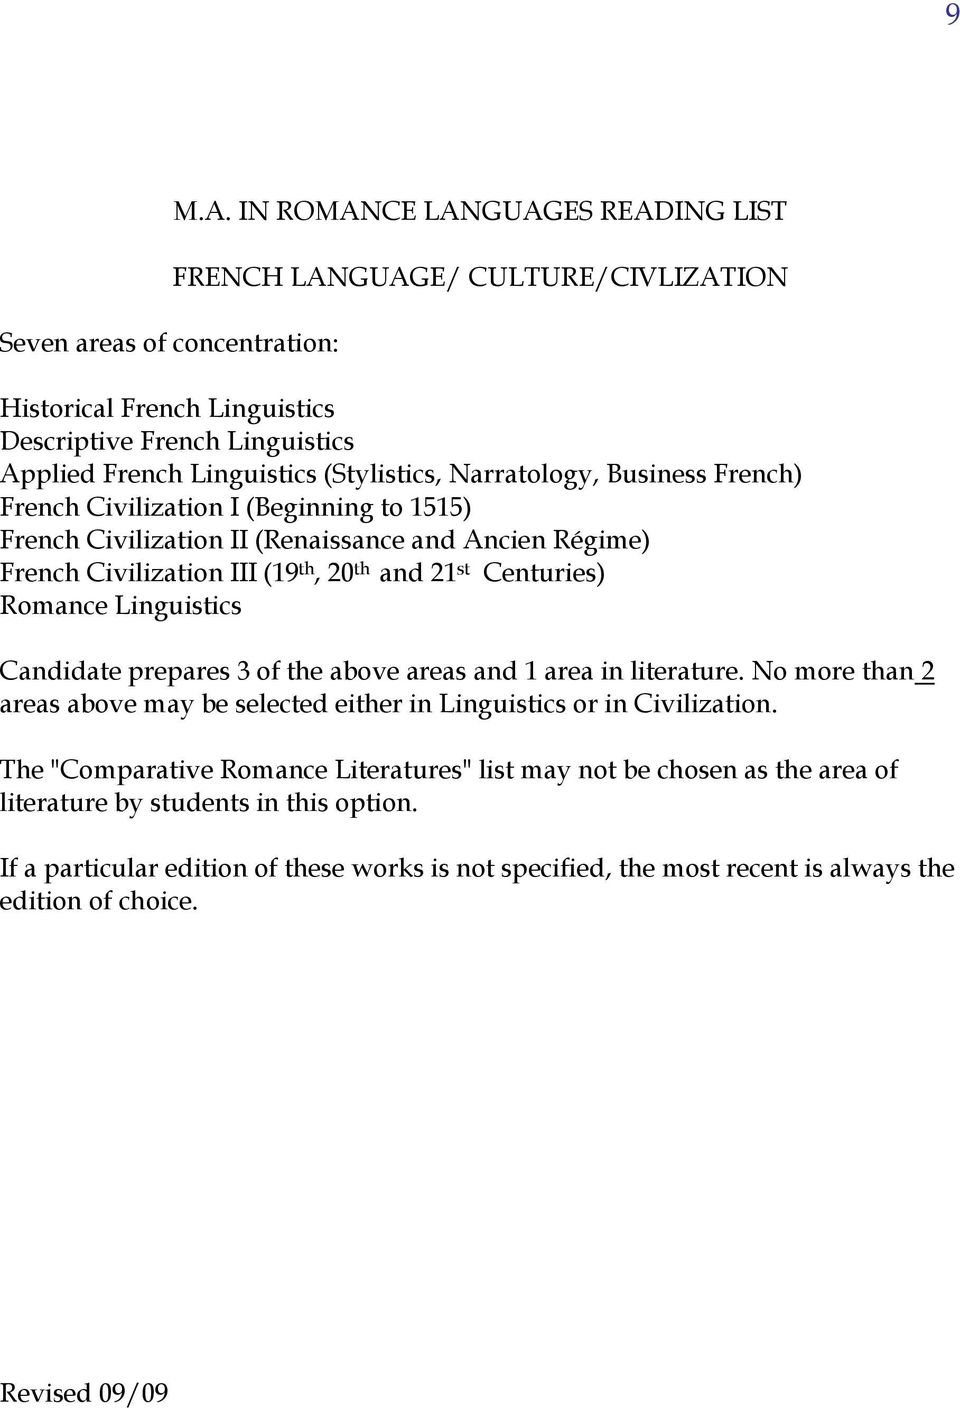 French) French Civilization I (Beginning to 1515) French Civilization II (Renaissance and Ancien Régime) French Civilization III (19 th, 20 th and 21 st Centuries) Romance Linguistics Candidate